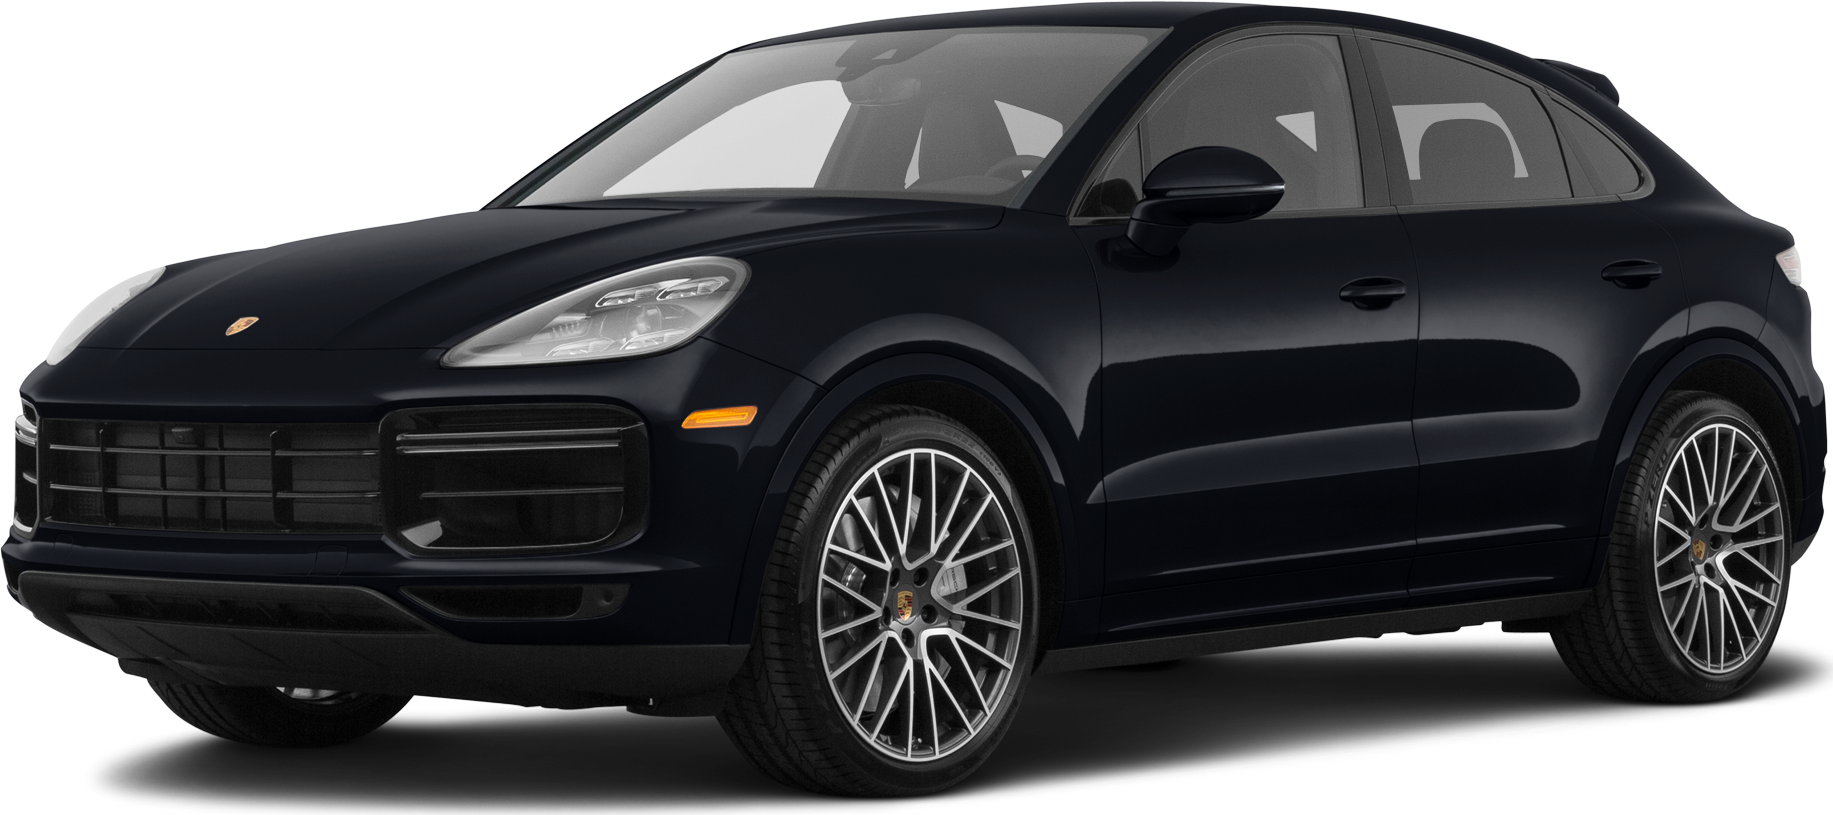 2020 Porsche Cayenne Turbo Coupe review: More fashionable, still